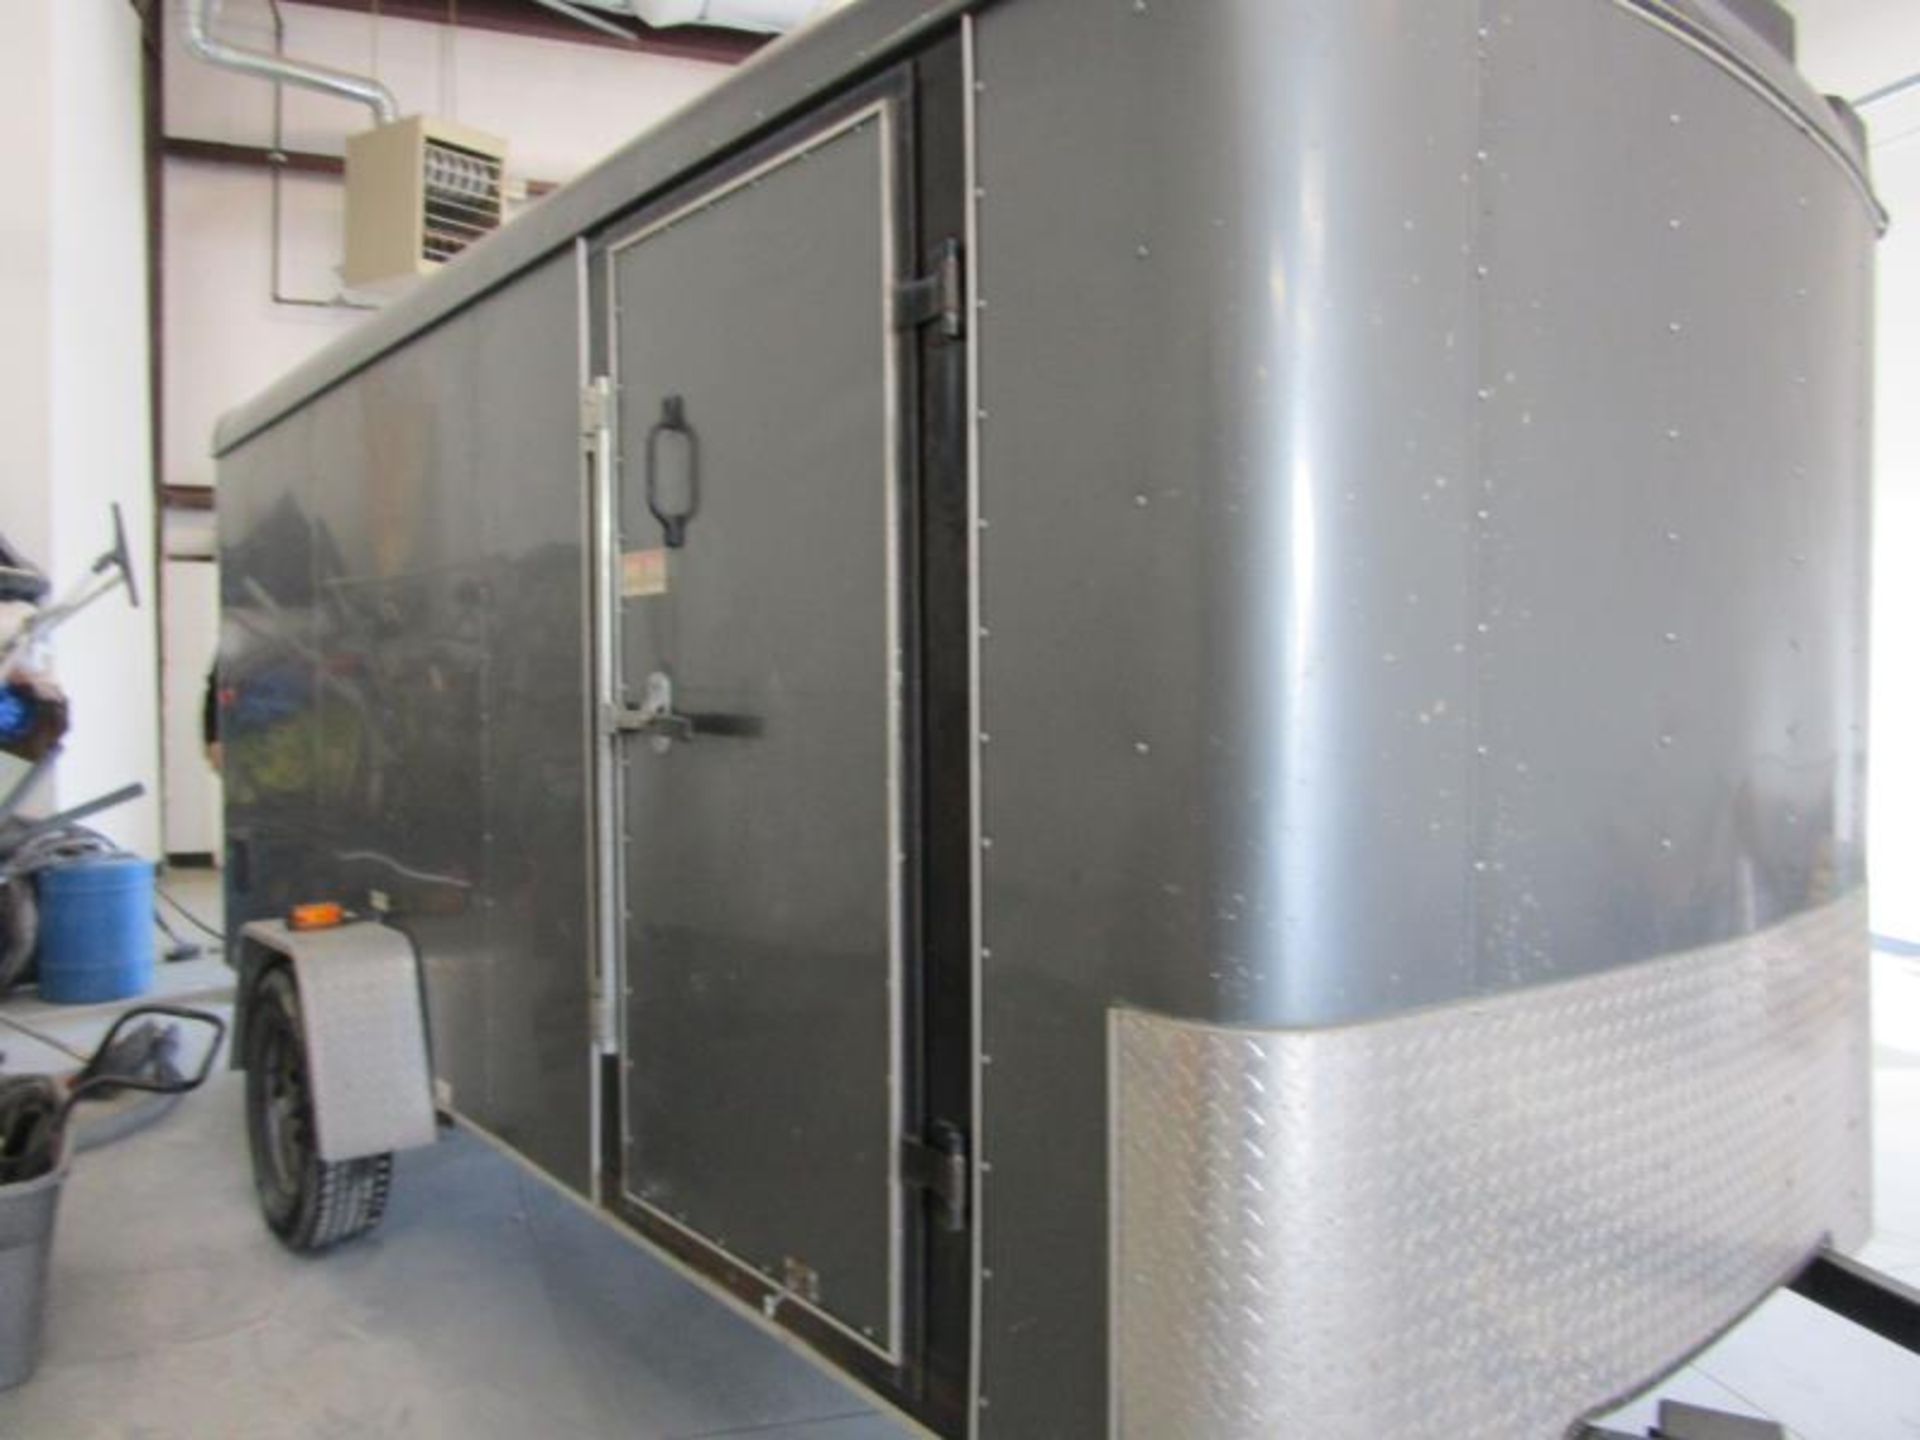 2011 Enclosed Utility Trailer, 14.5', by Interstate Kingman, 3,500lbs, Model: ILRD614SAFS, VIN: - Image 14 of 21